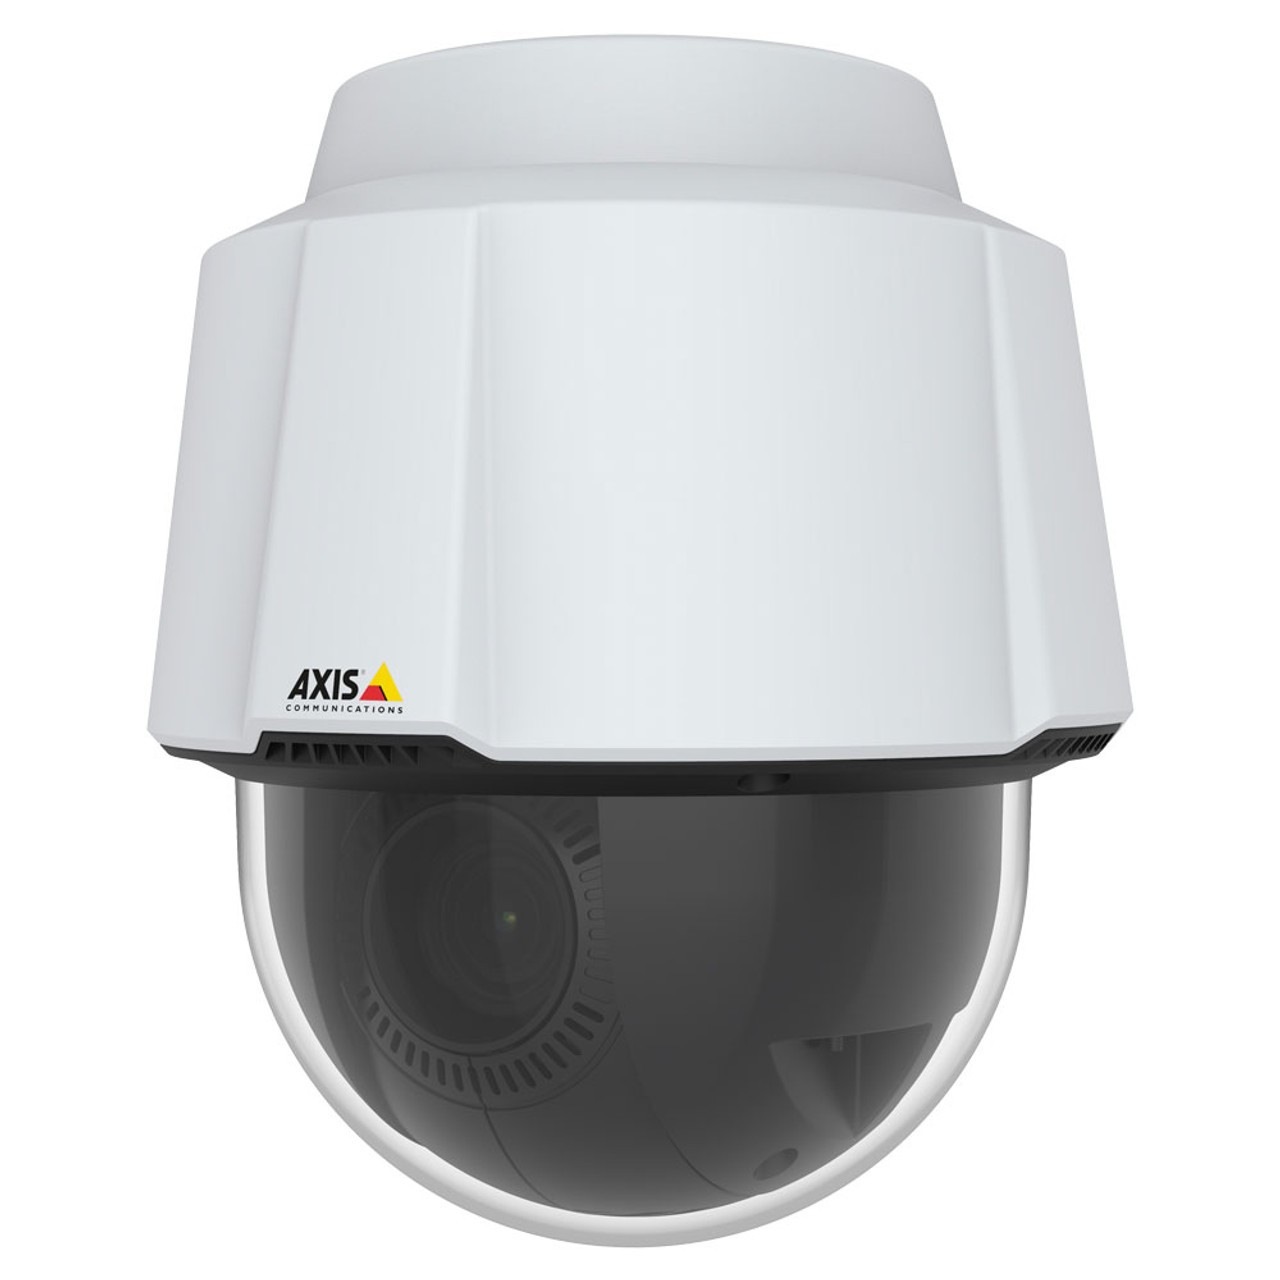 Axis Q6074 Ptz 720p Network Dome 60Hz Camera Only 01968-004